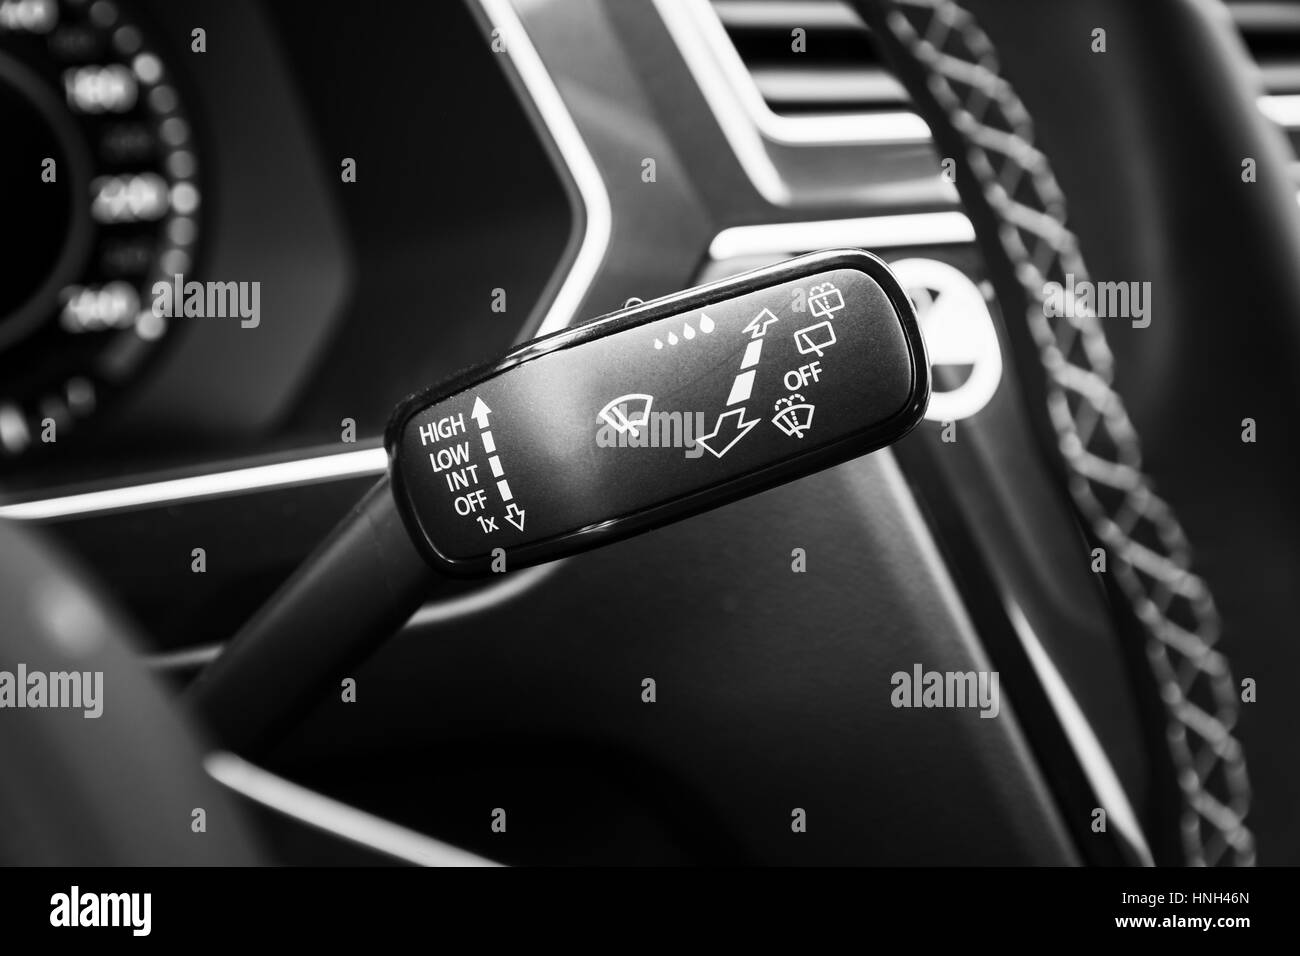 Wipers mode selector, modern car interior details Stock Photo